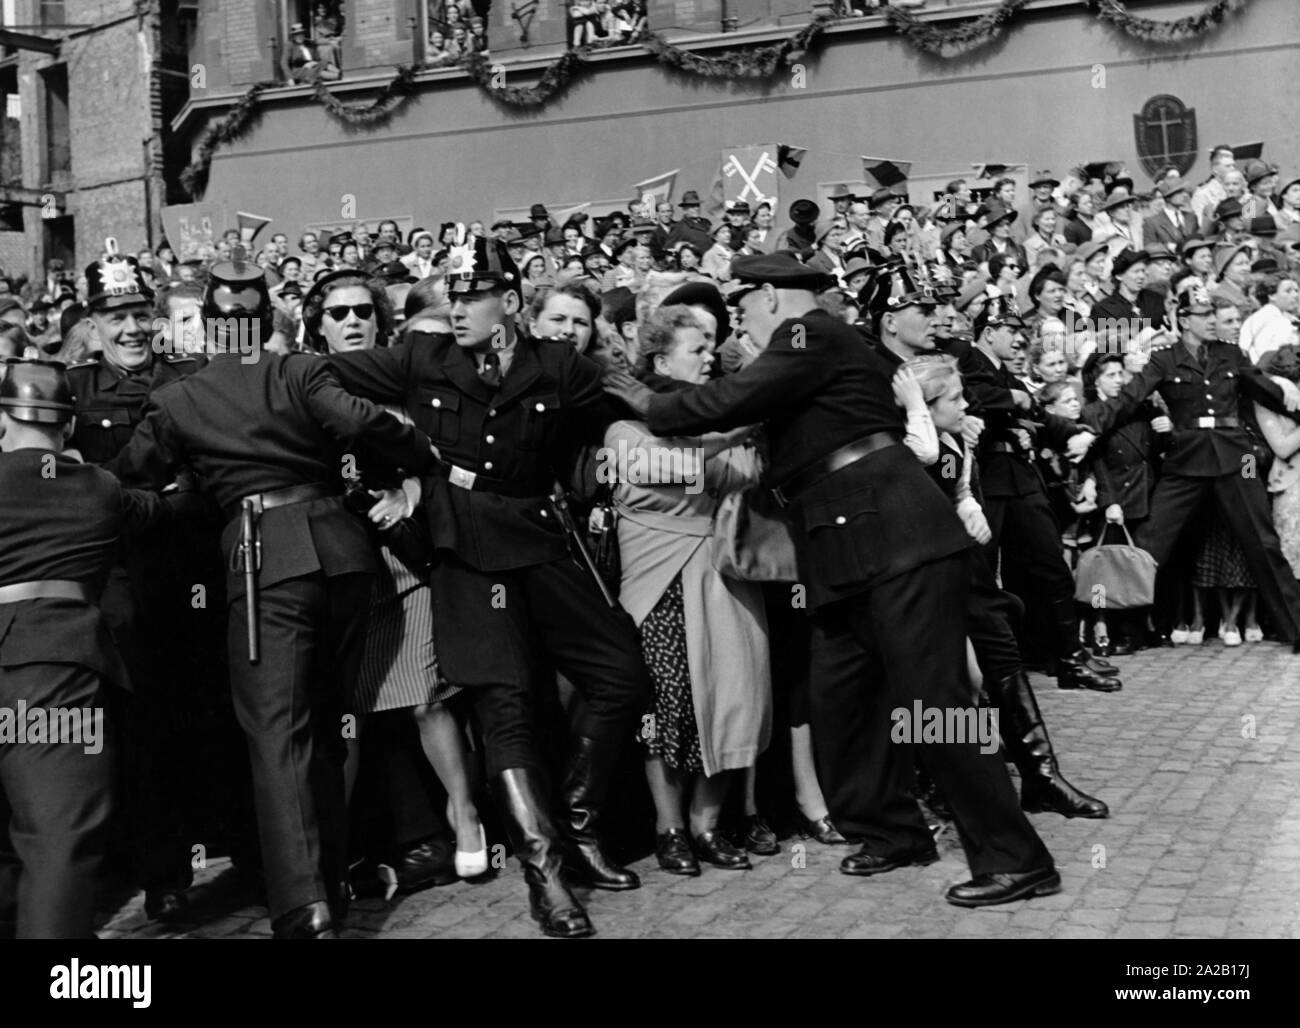 Police officers try to push back the enthusiastic crowd at the wedding of Duke Ernst August of Brunswick with Princess Ortrud of Schleswig-Holstein-Gluecksburg in Hanover. Stock Photo